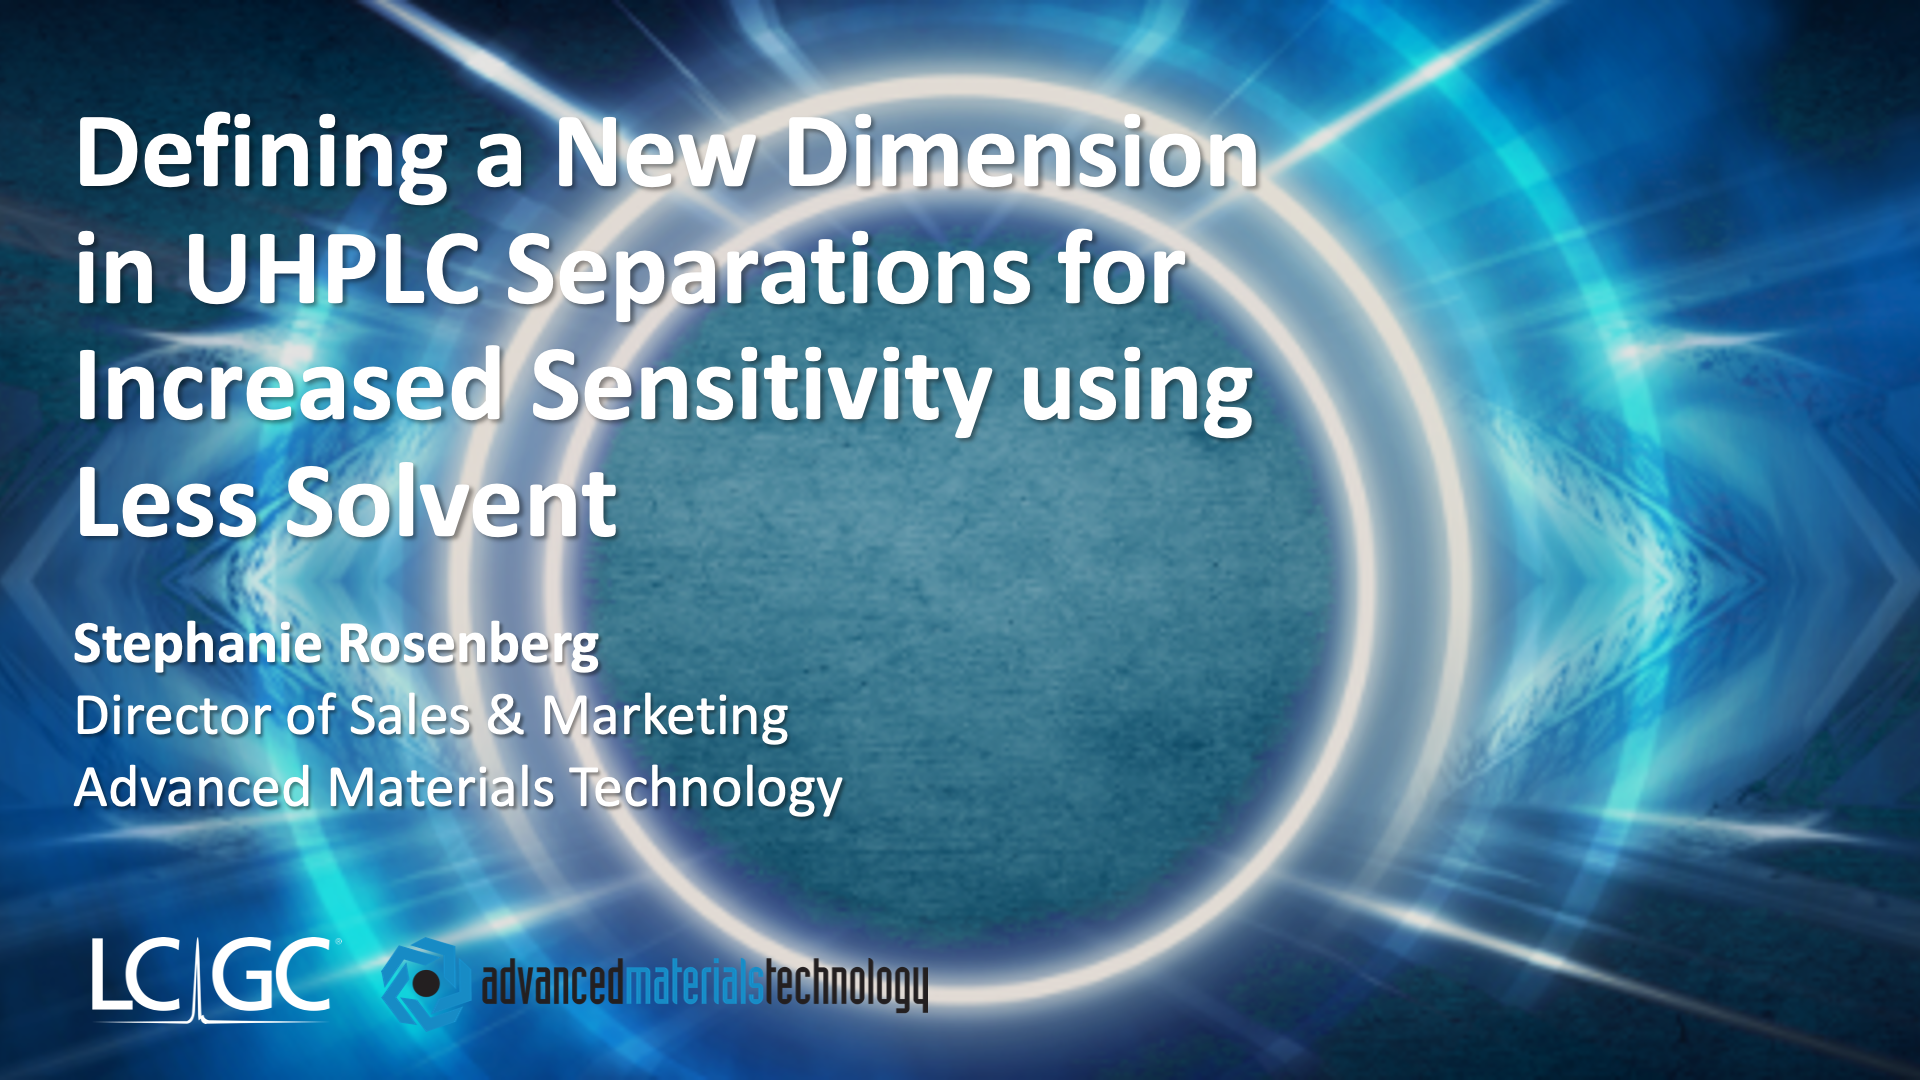 Defining a New Dimension in UHPLC Separations for Increased Sensitivity using Less Solvent 